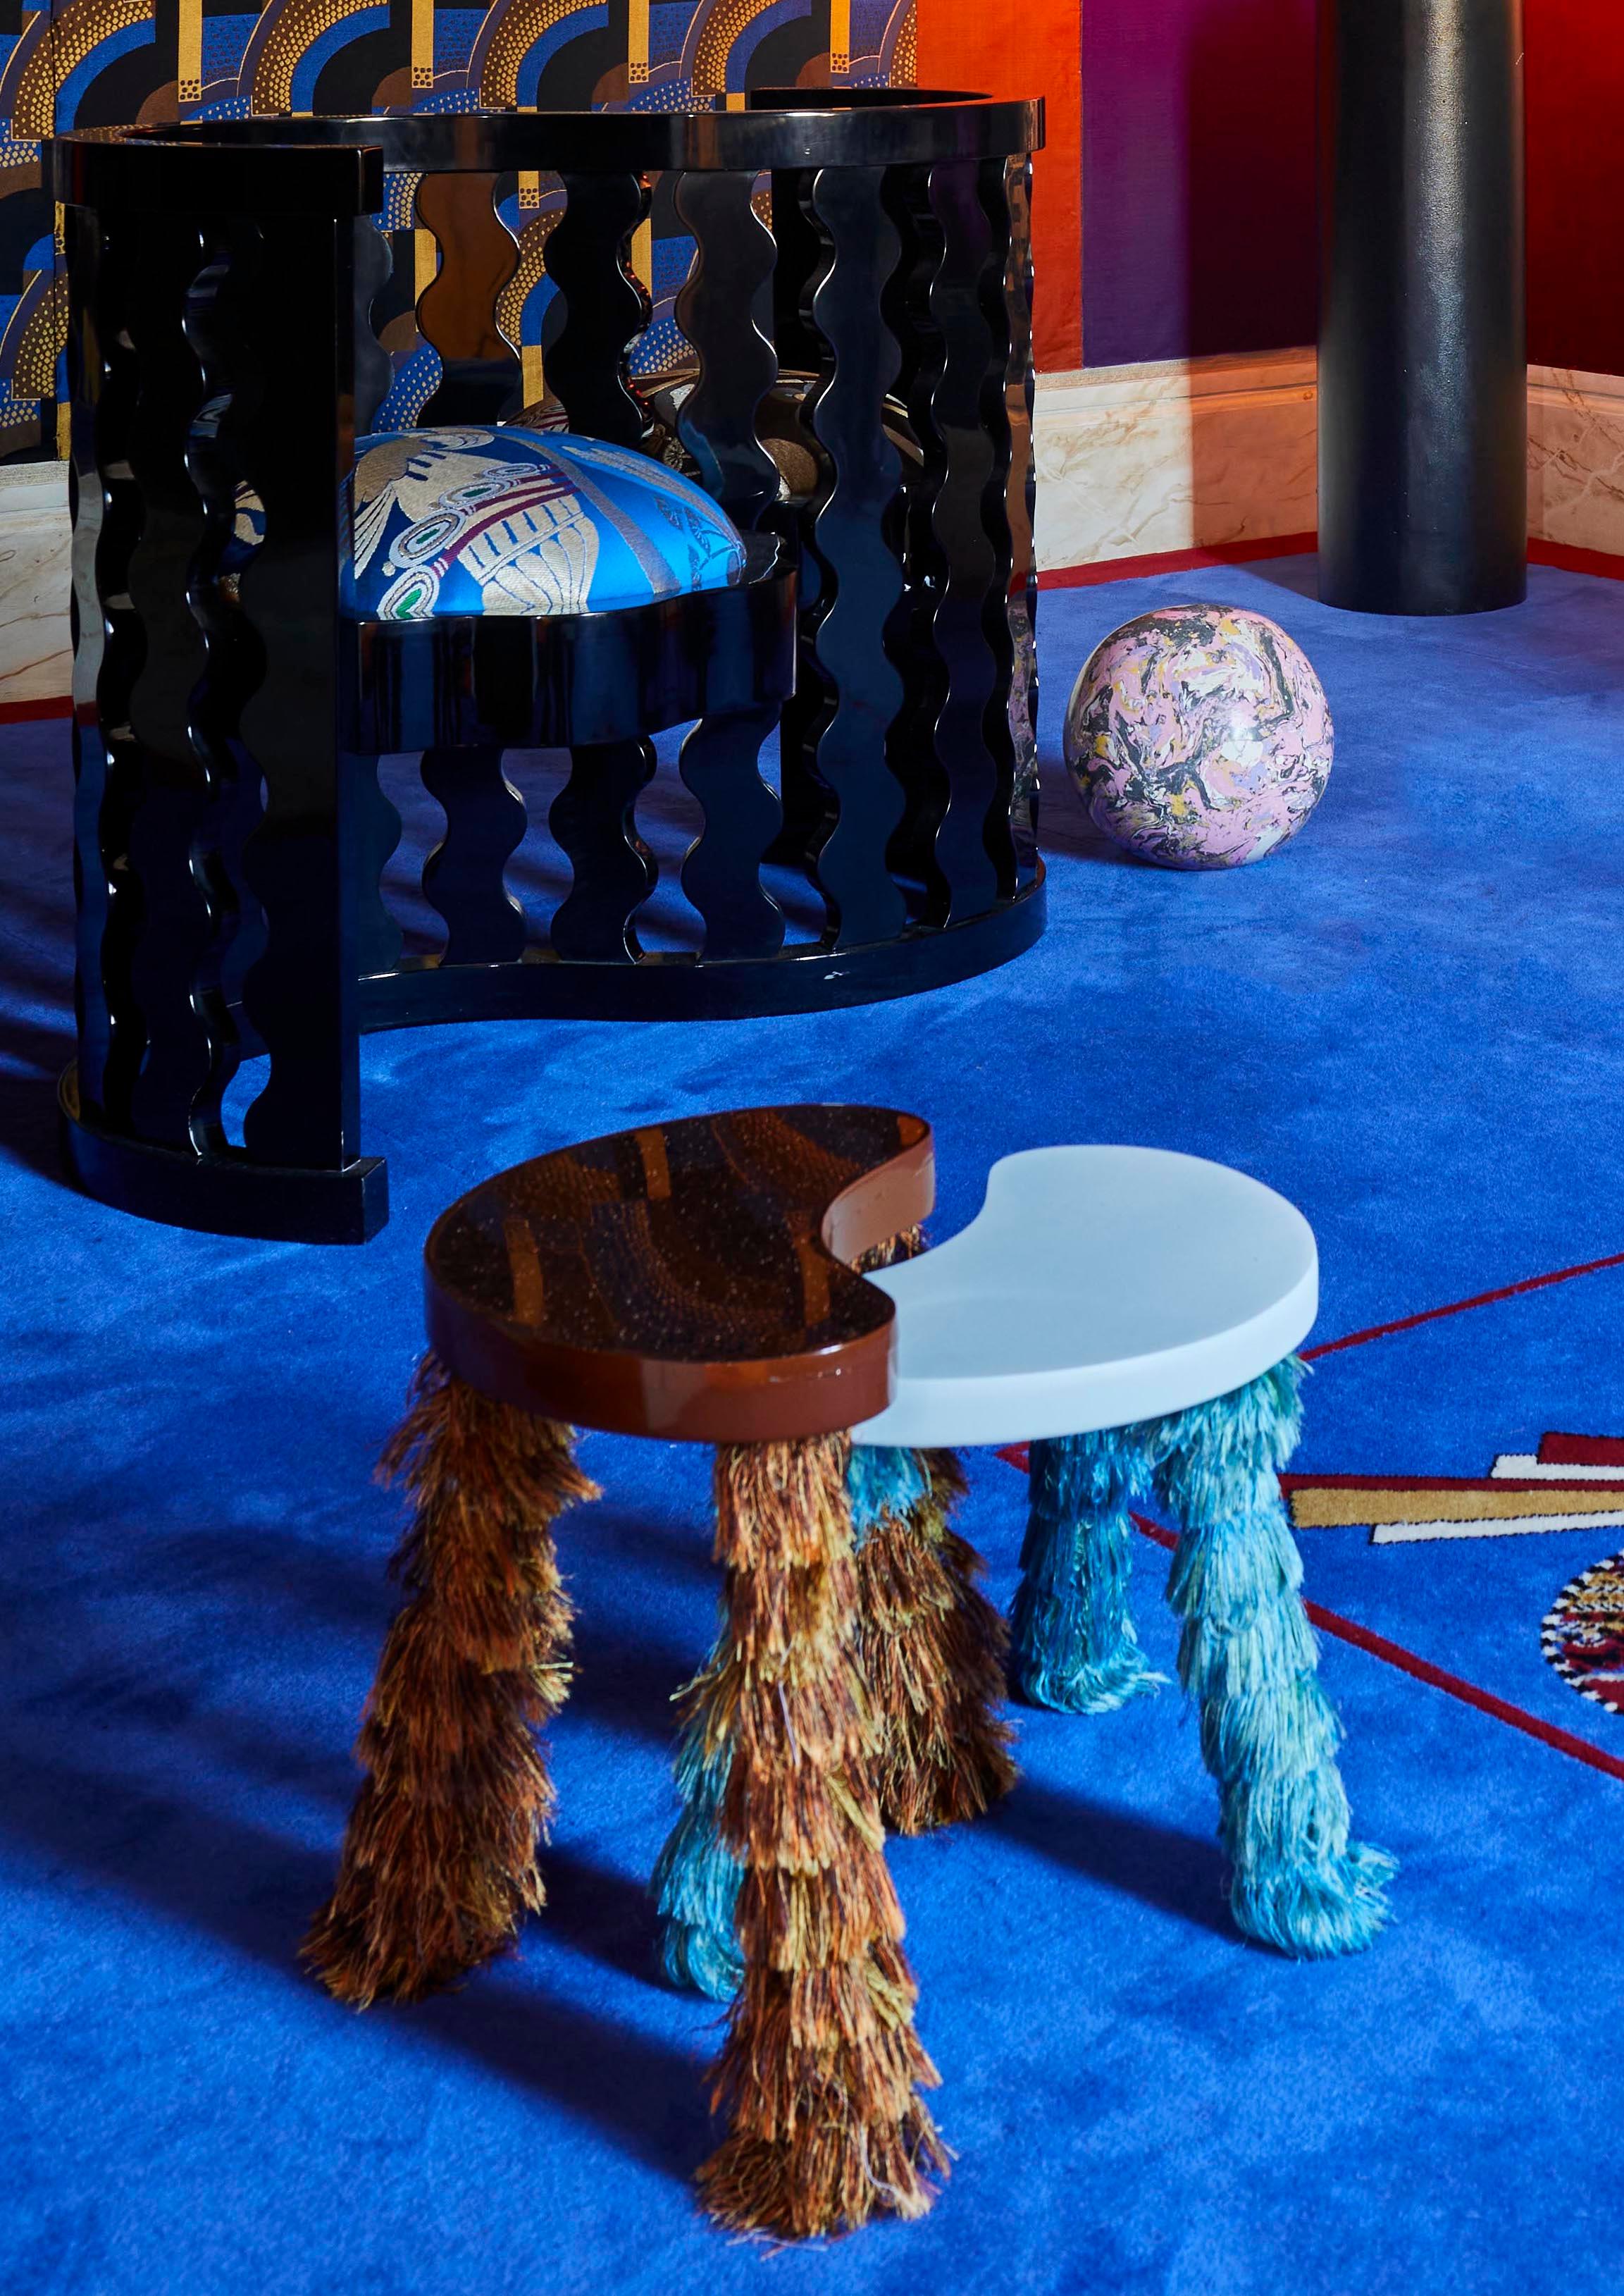 The Bisou stool, the result of a collaboration between Uchronia and the silk Manufacture Prelle to mark the 